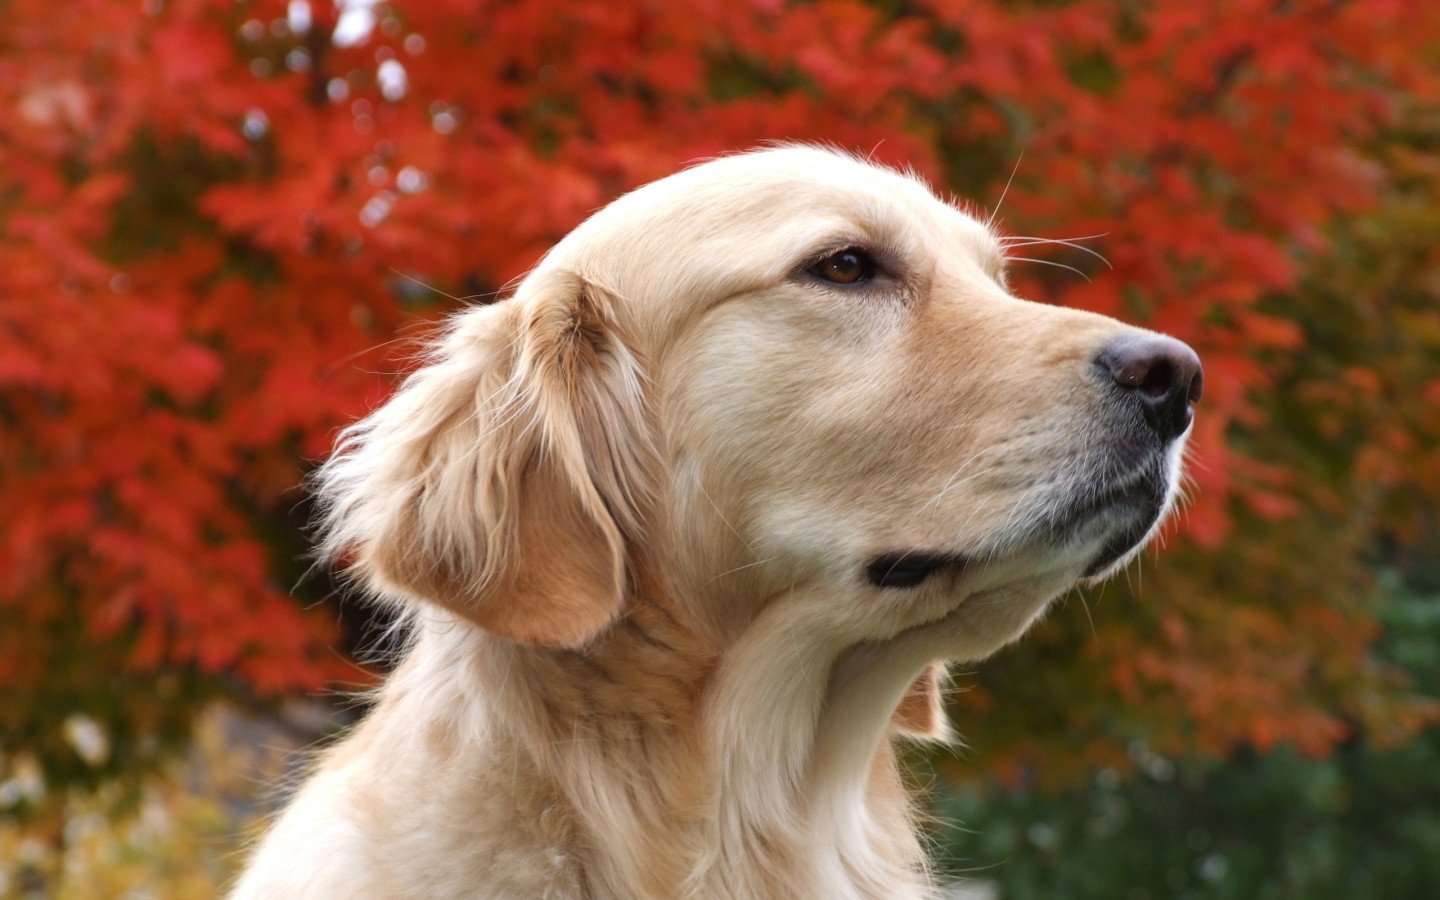 All Wallpapers Beautiful Dog Hd Wallpapers 1440x900